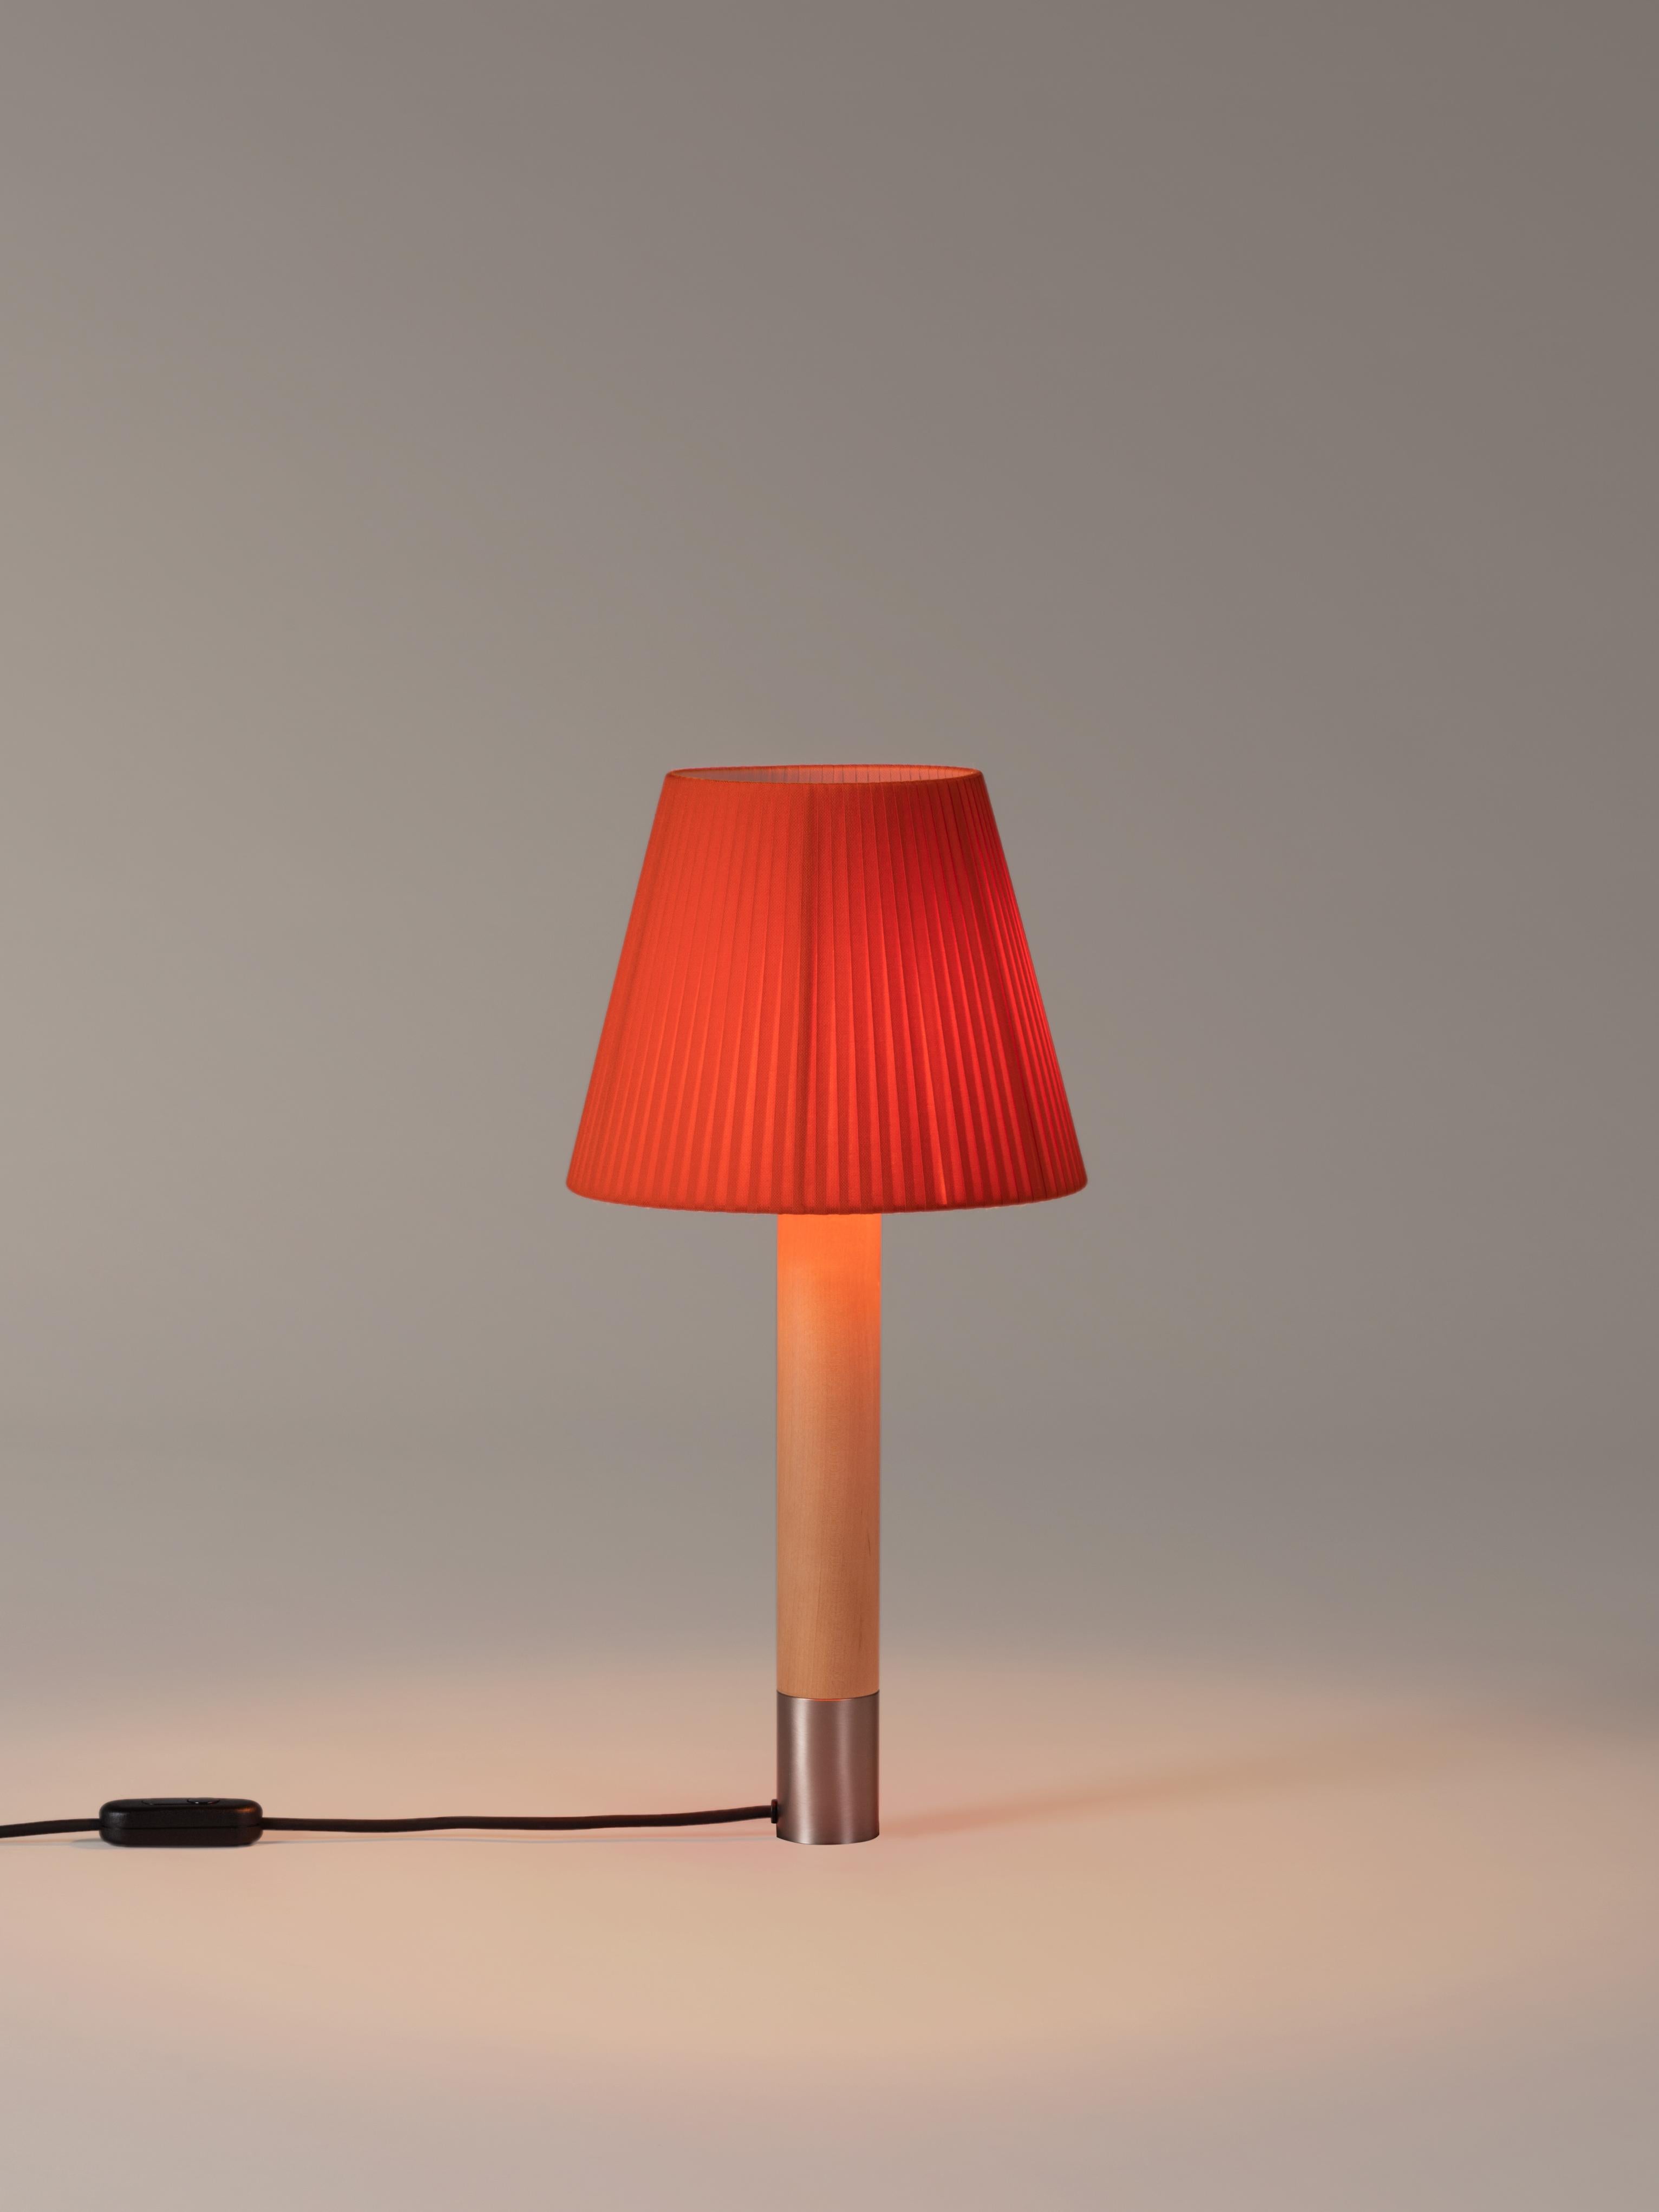 Nickel and Red Básica M1 table lamp by Santiago Roqueta, Santa & Cole
Dimensions: D 25 x H 52 cm
Materials: Nickel, birch wood, ribbon.
Available in other shade colors and with or without the stabilizing disc.
Available in nickel or